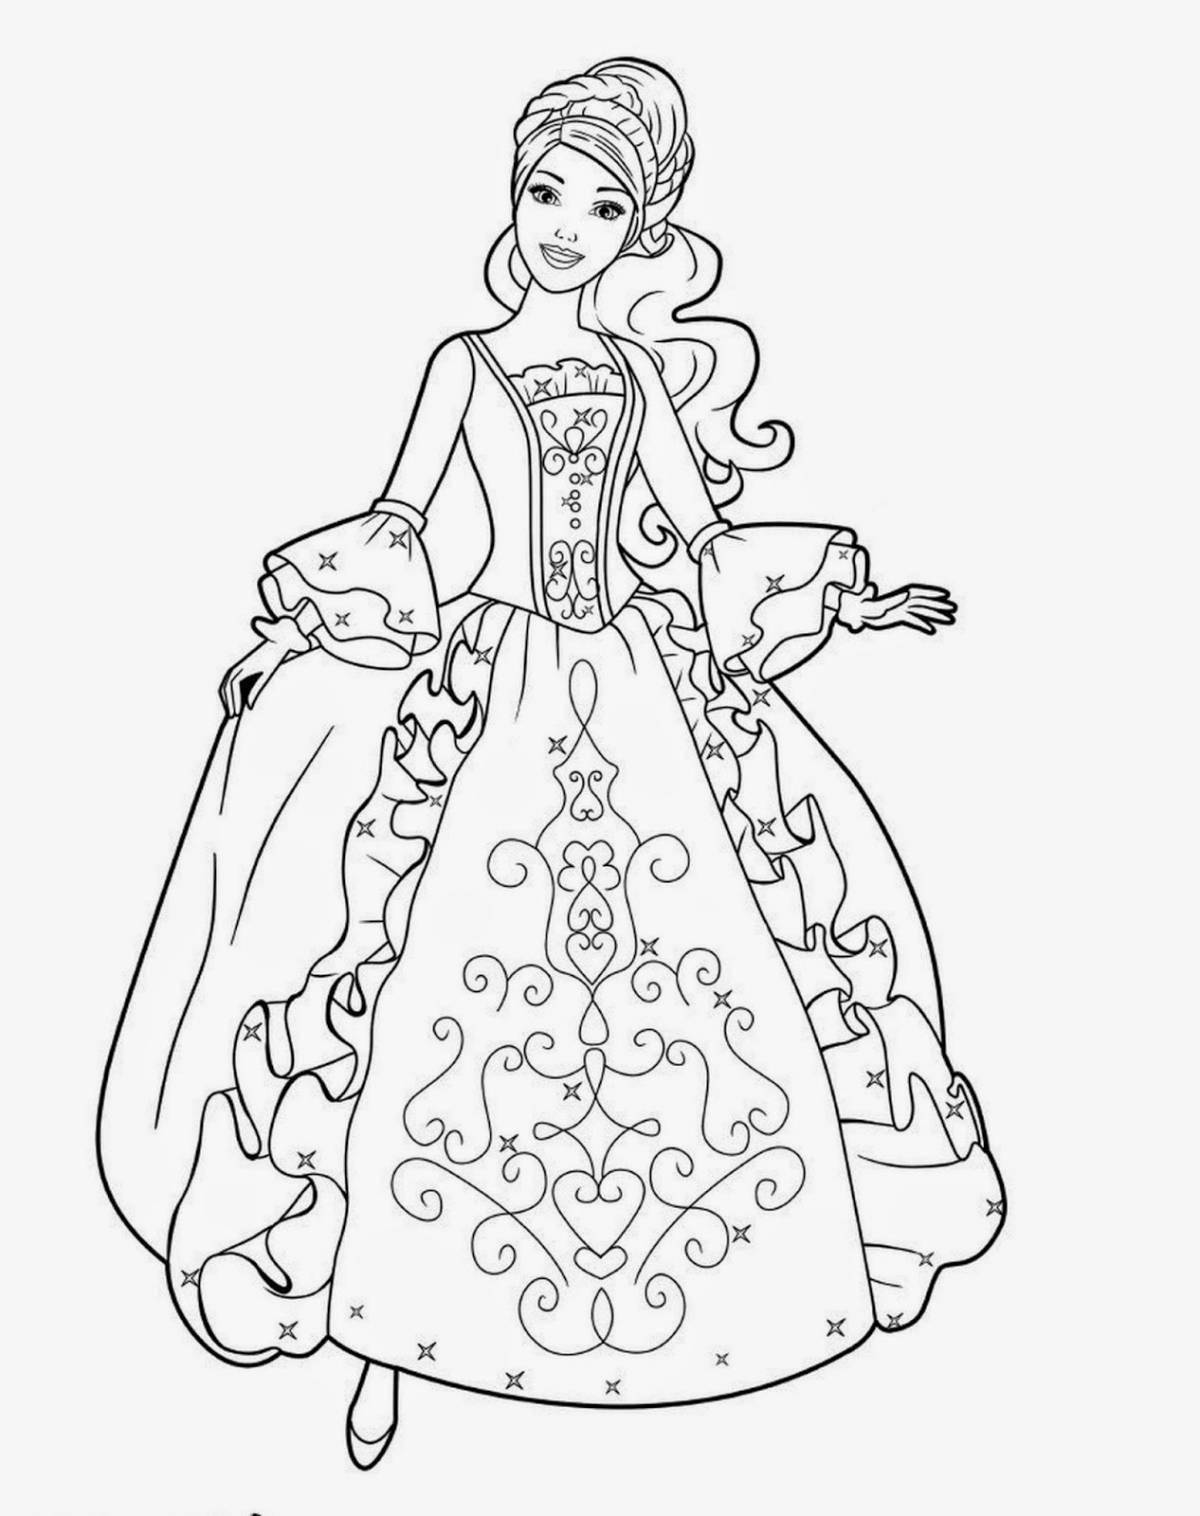 Awesome princess barbie coloring page